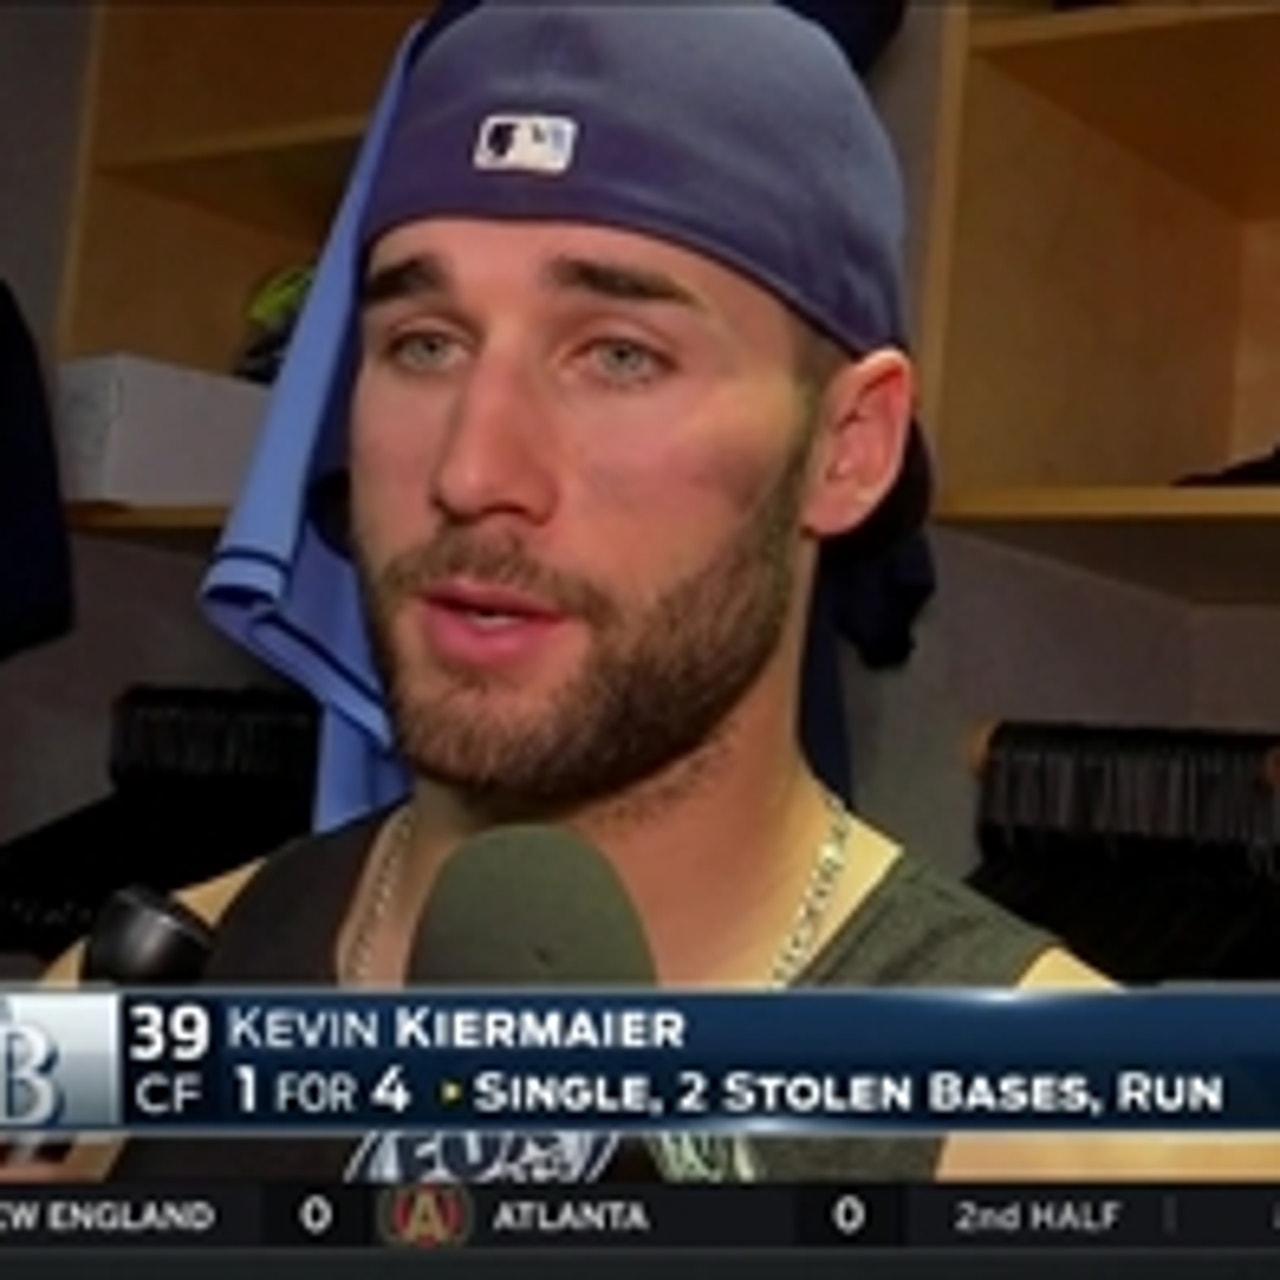 Kevin Kiermaier discusses his stolen bases and next season